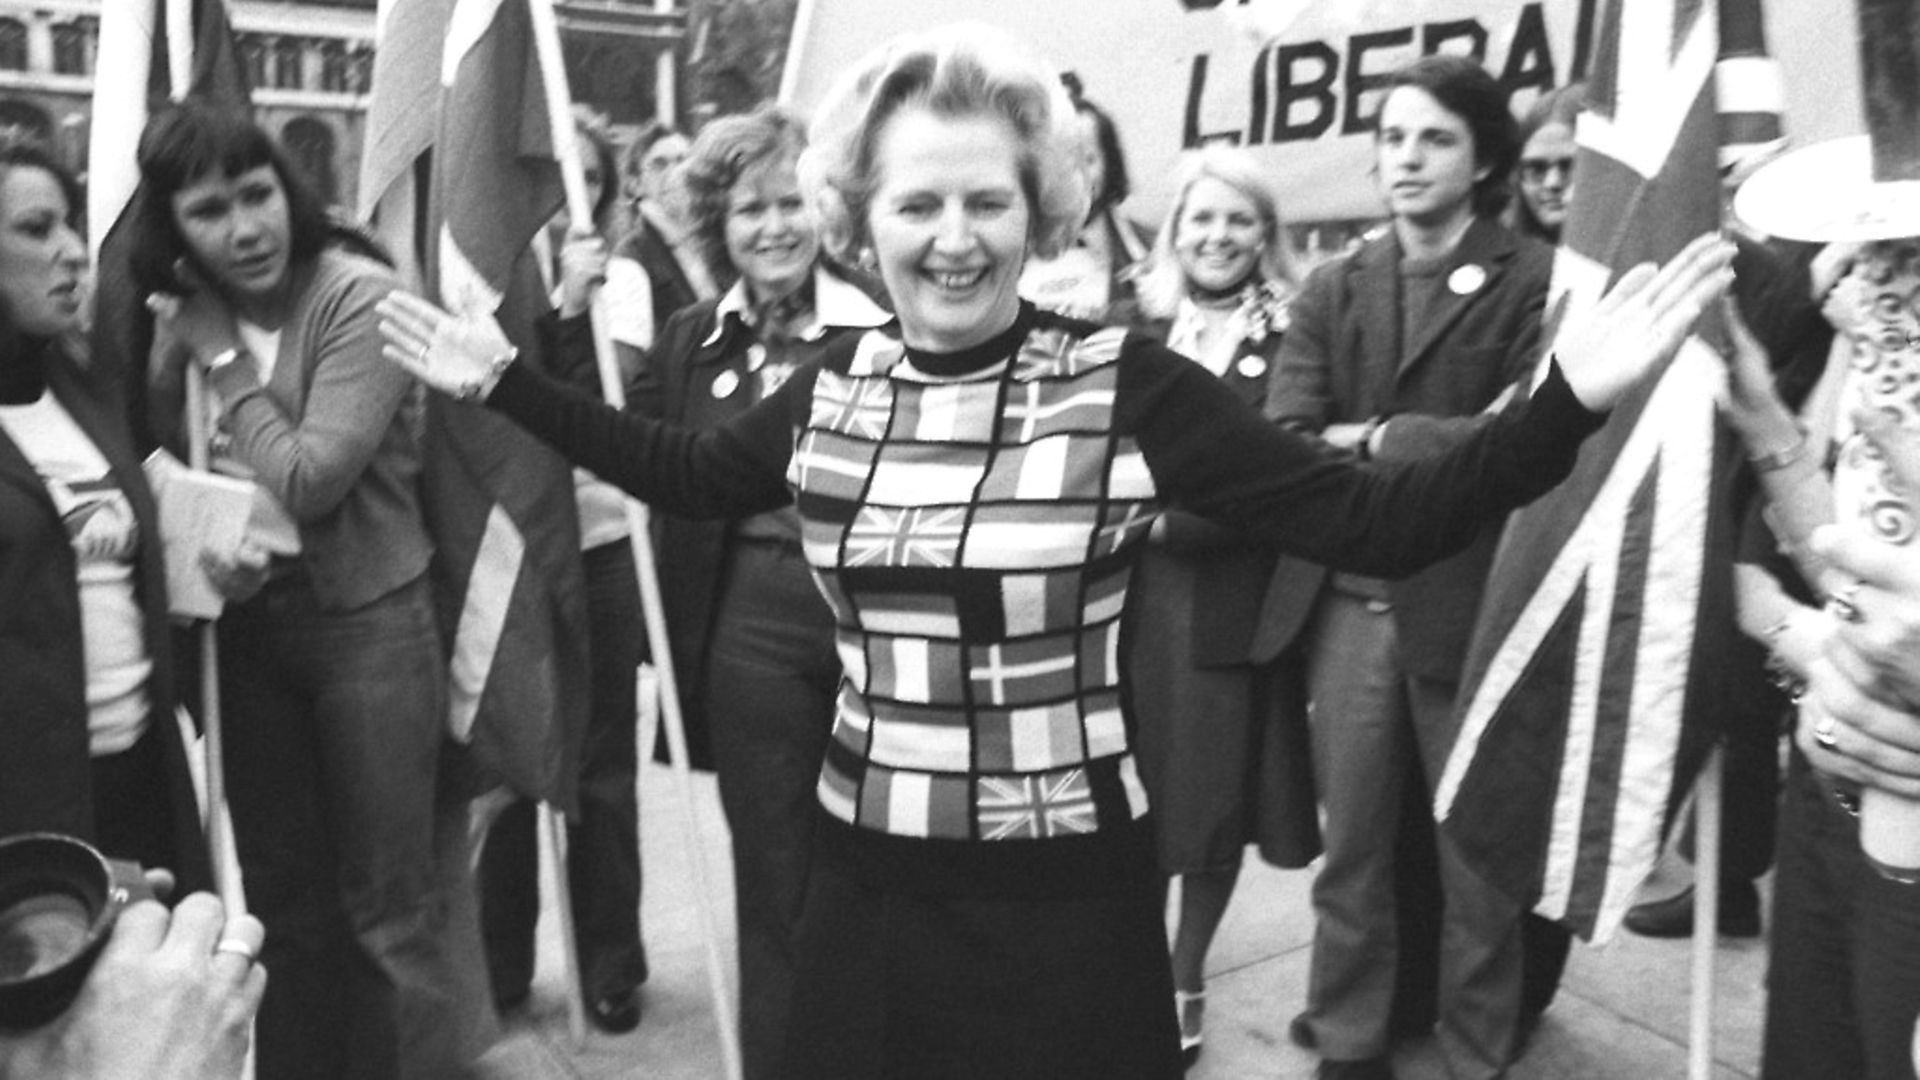 Margaret Thatcher, sporting a sweater bearing the flags of European nations, in Parliament Square during her 'Yes to Europe' campaign. Photograph: PA Archive. - Credit: PA Archive/PA Images